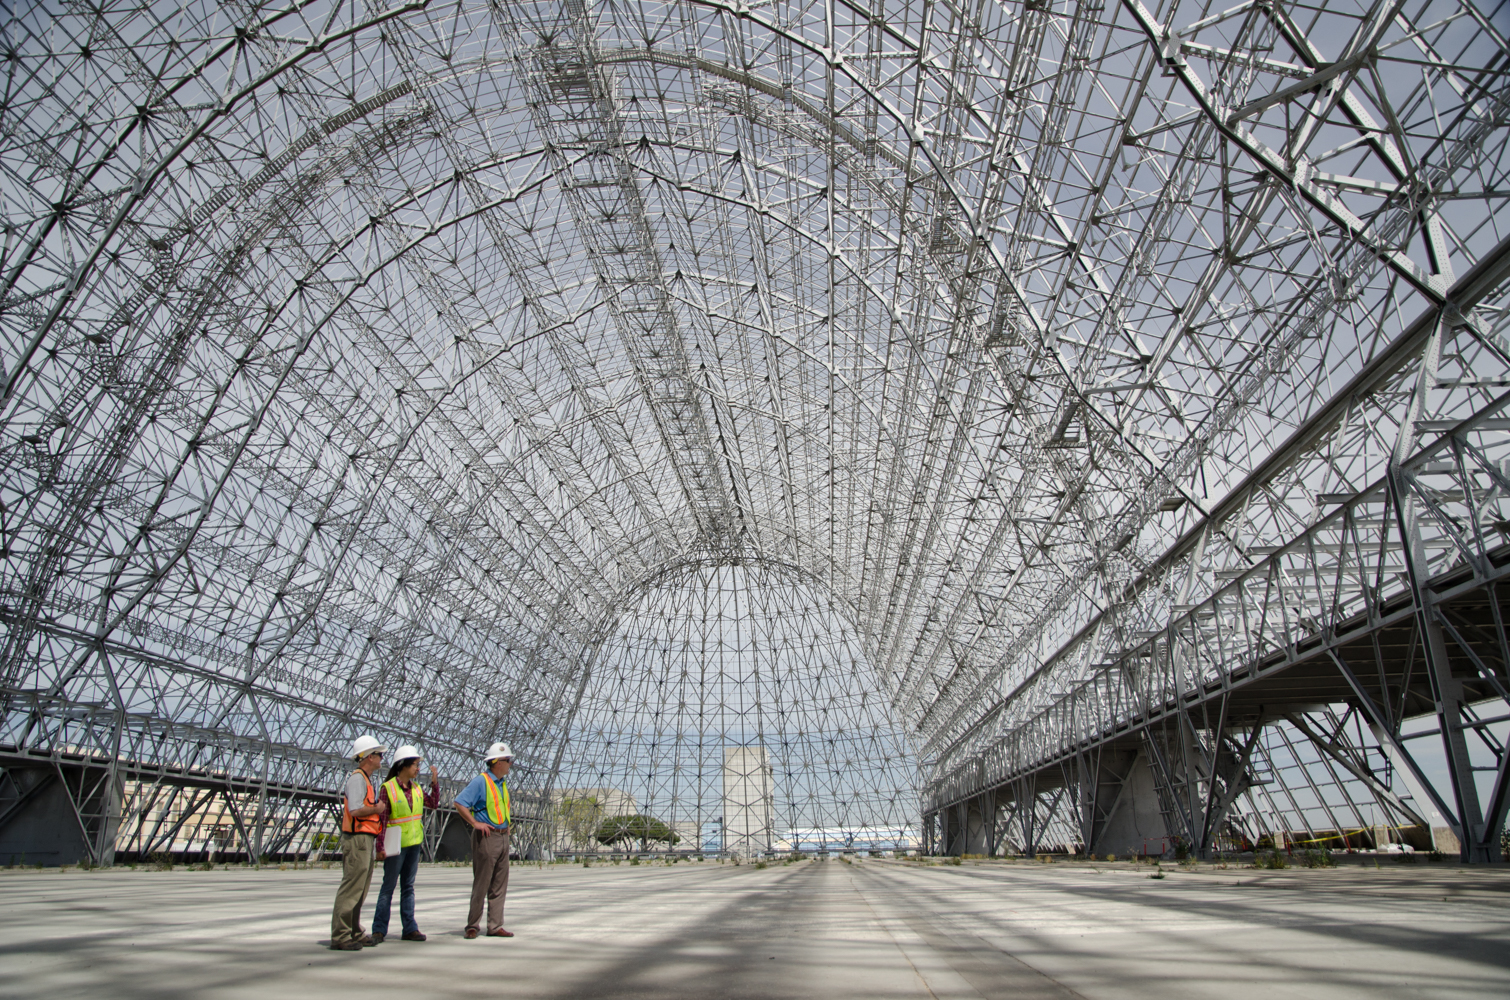 Hangar One, completed in 1933 to house  the naval airship USS Macon, covers eight acres.  The exterior panels were removed in 2011-2012 due to leaking toxic chemicals and asbestos.